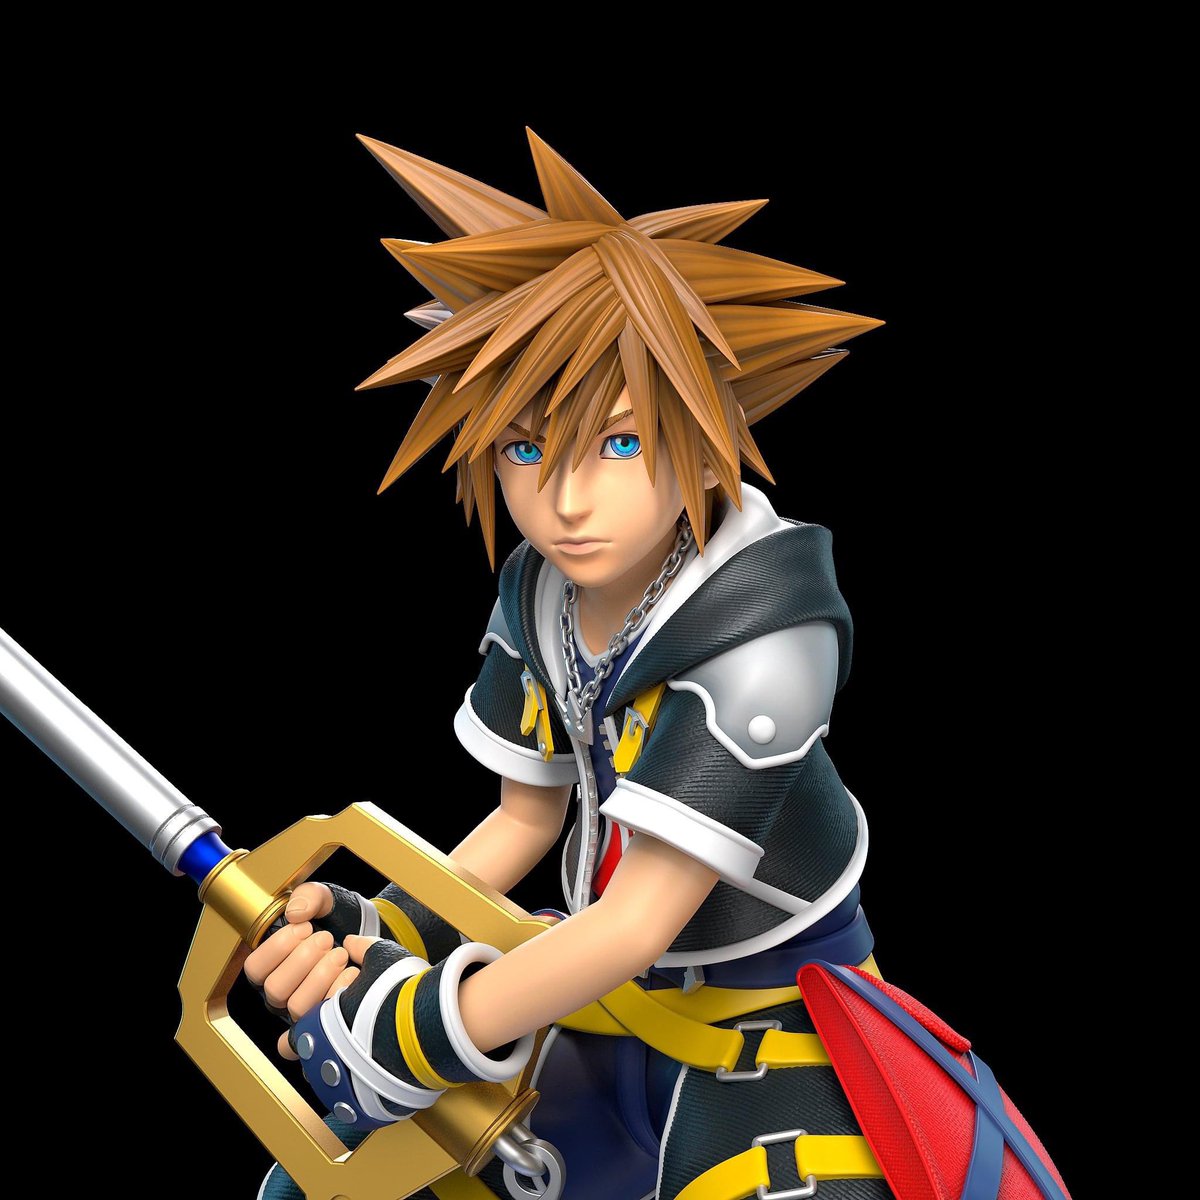 Kingdom Hearts Fans! 🤩👏💯 He’s finally here! Sora has arrived! If you love your Aqua statue by BlackSwan Collectibles! You don’t wanna miss this! 1:4 scale resin statue! More to come! Joined their group! Link below! 🌟💯 facebook.com/share/fiPF5pFv…